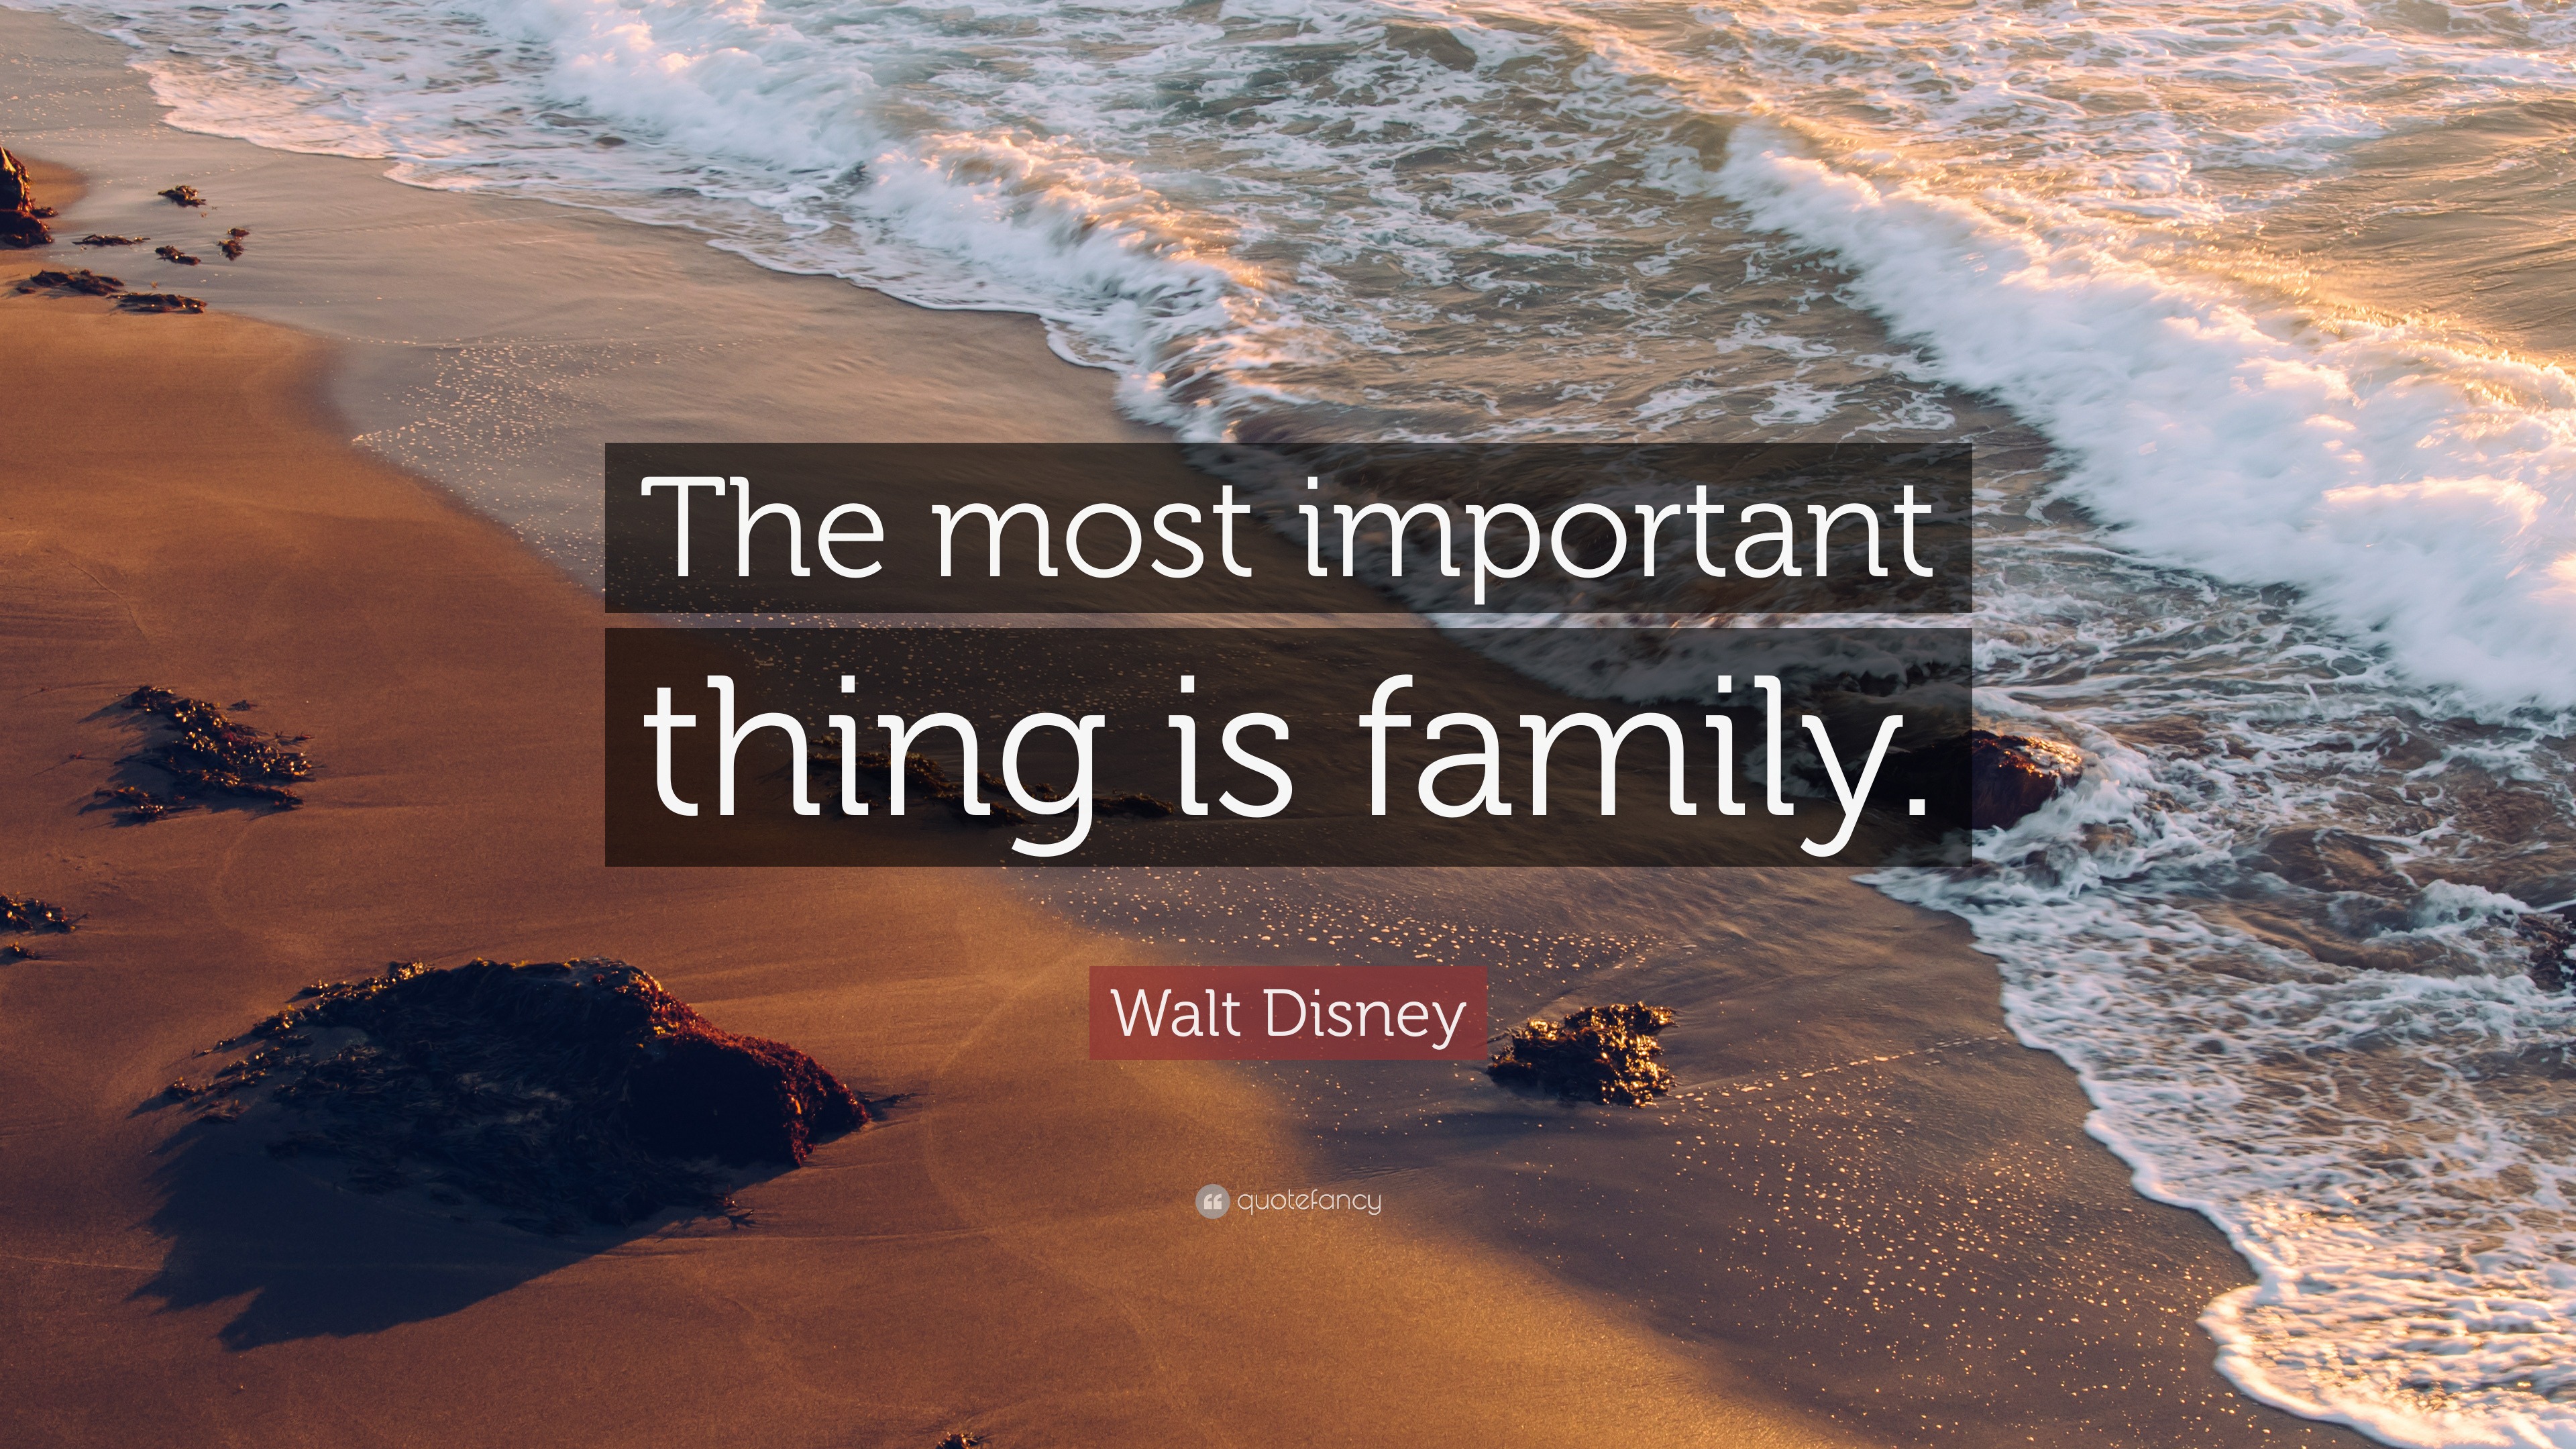 Walt Disney Quote: “The most important thing is family.”